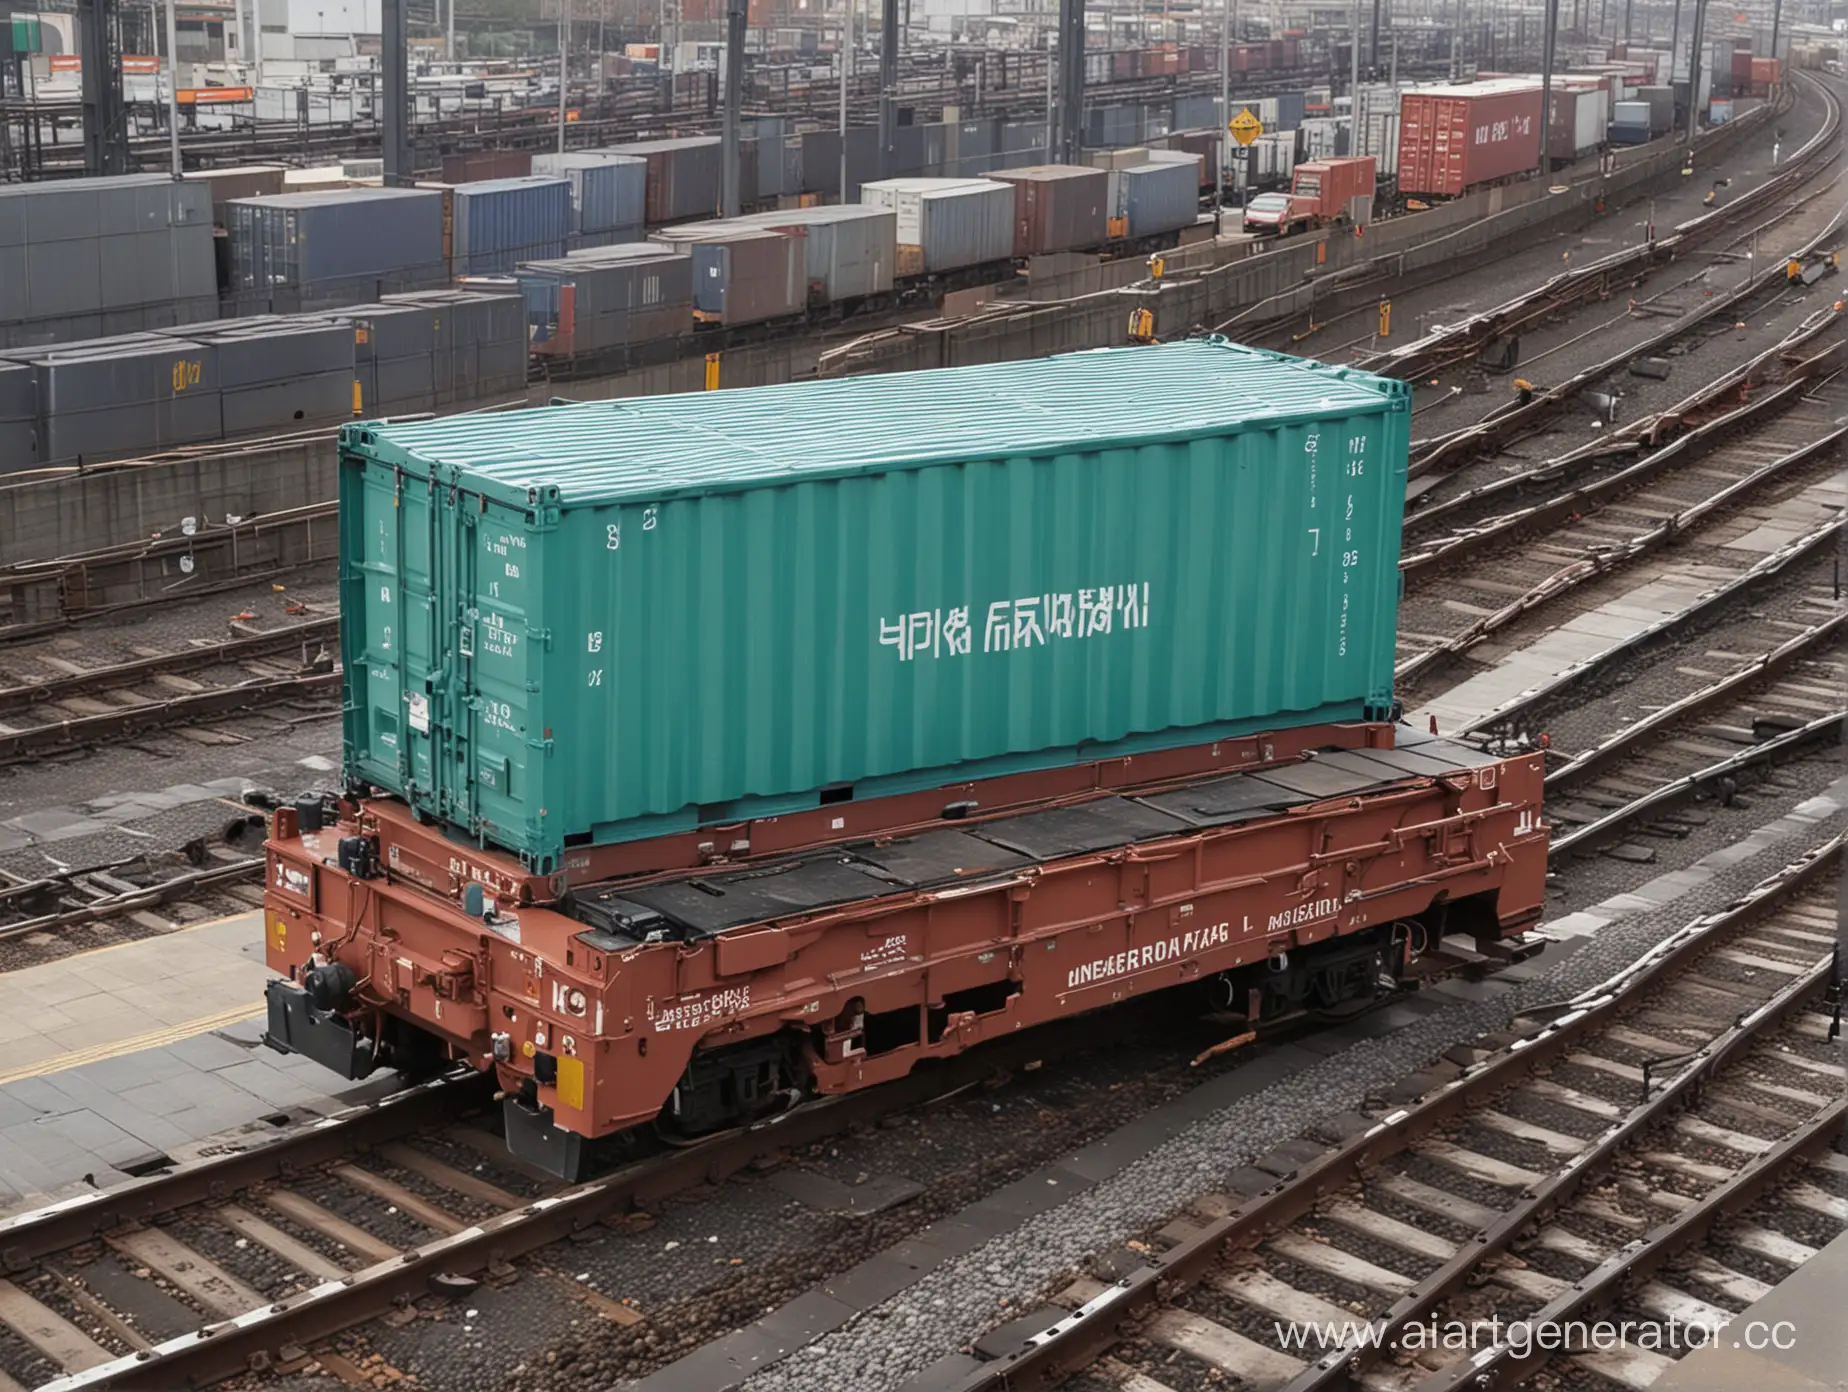 Rail-Container-on-Platform-Industrial-Freight-Transport-Scene